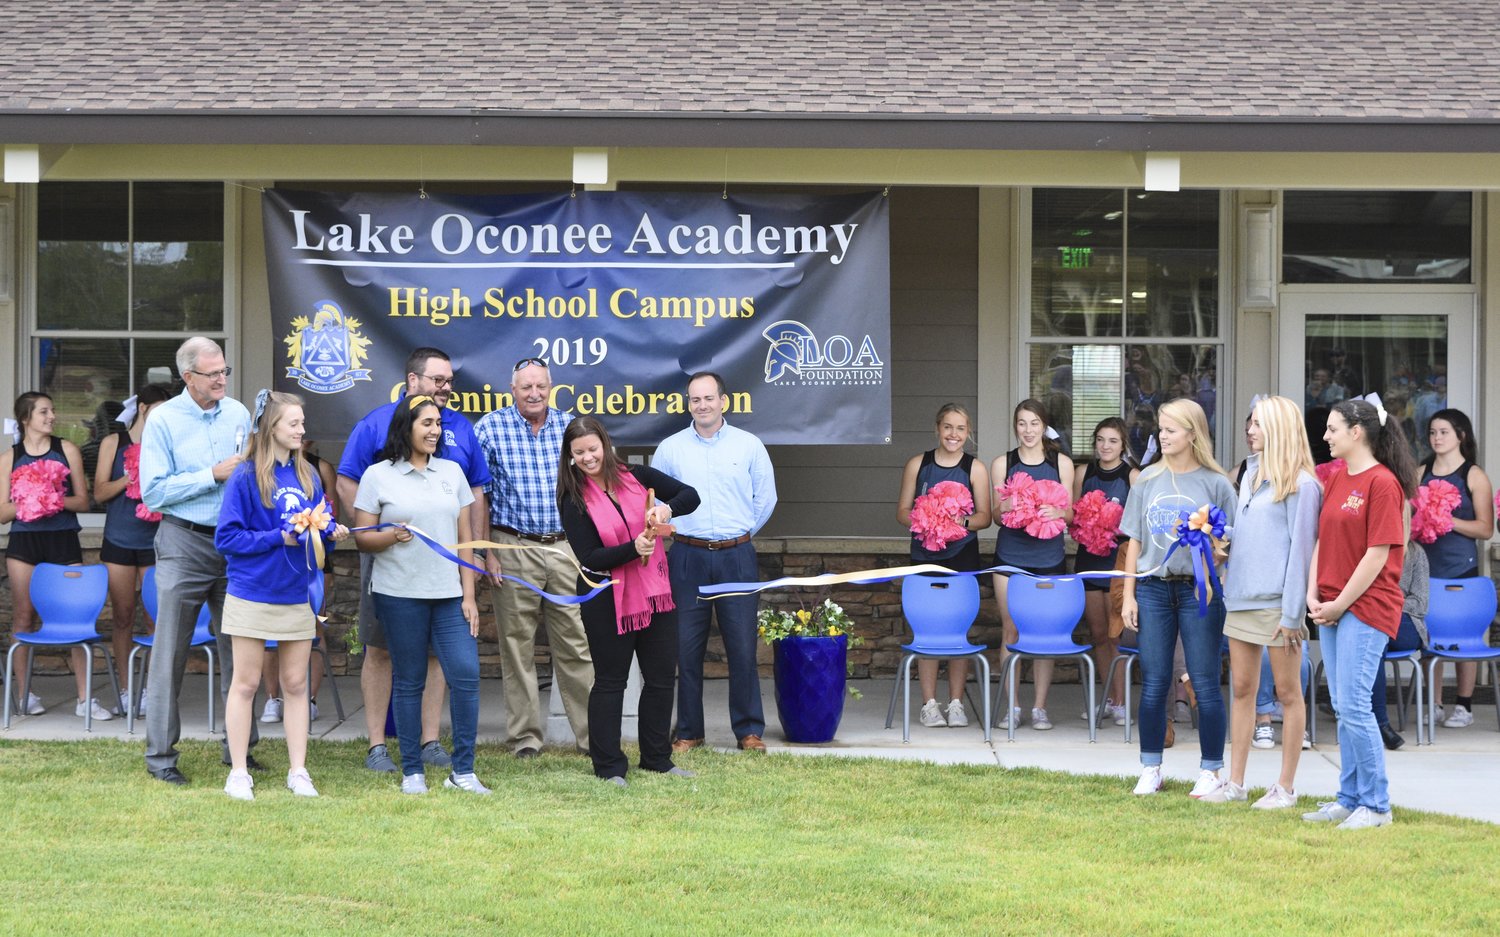 LAKE OCONEE ACADEMY OFFICIALLY OPENS NEW HIGH SCHOOL CAMPUS — Lake